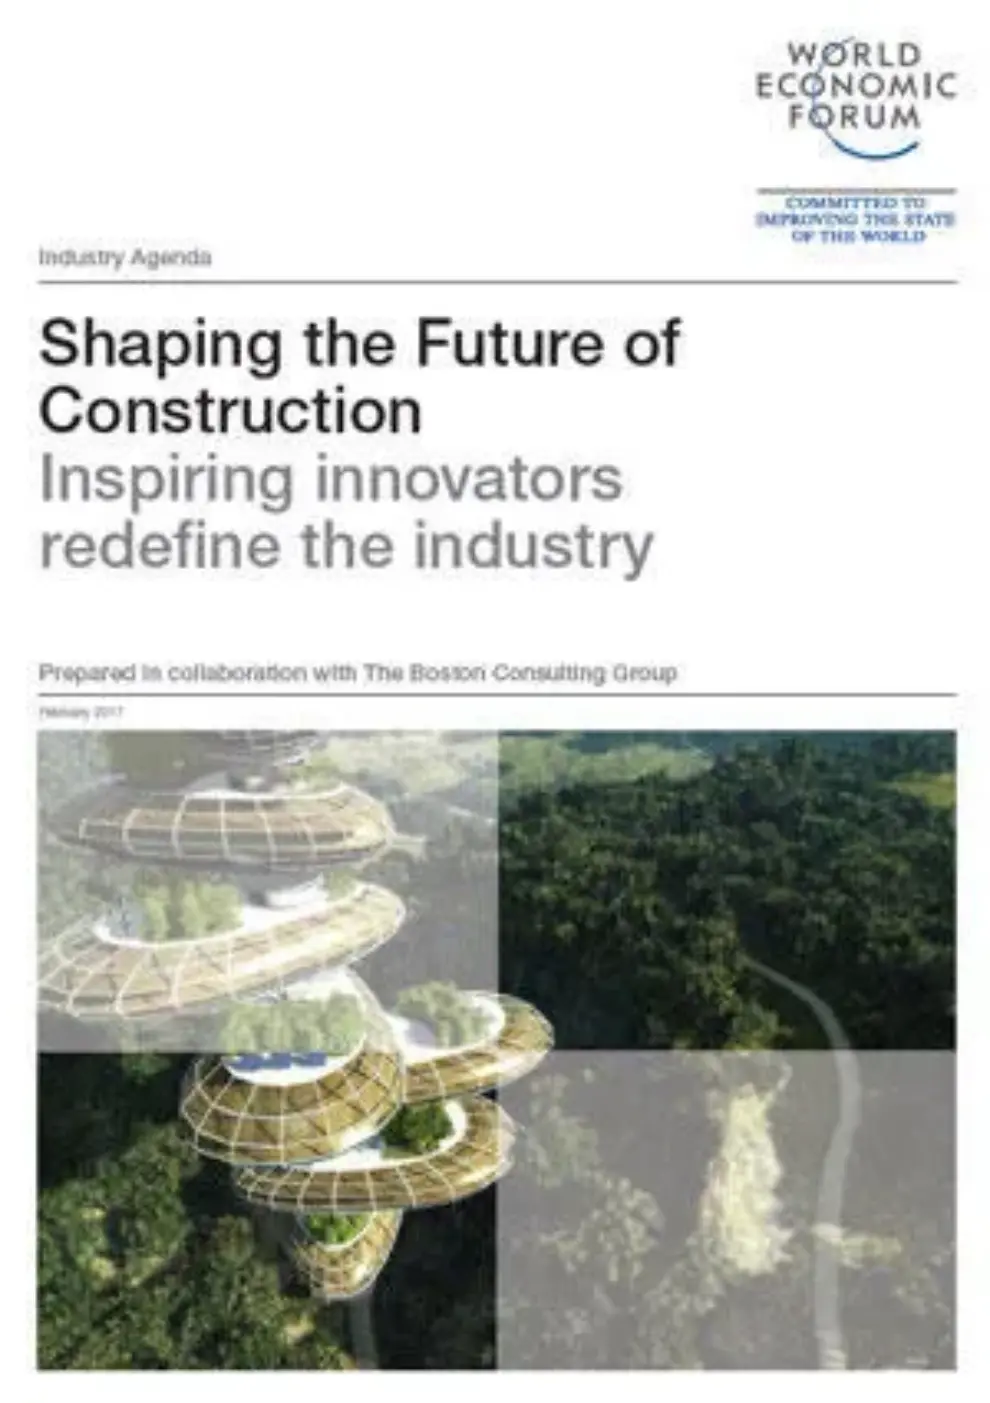 Report: Innovators shaking up tradition-bound construction industry